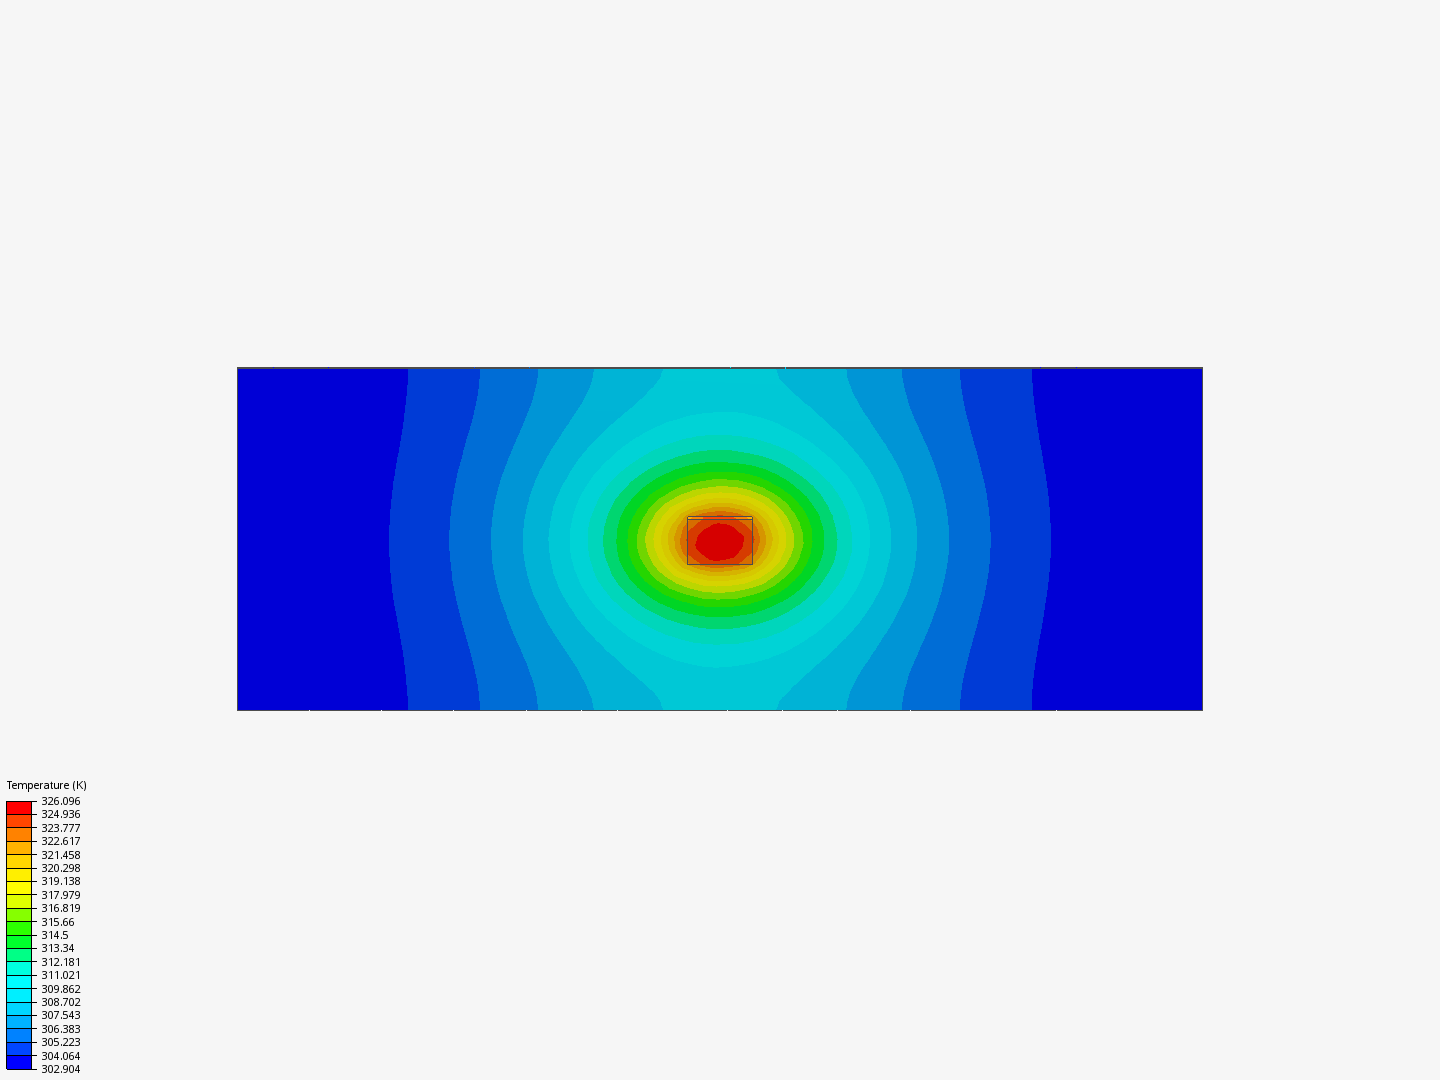 Supersonic flow image